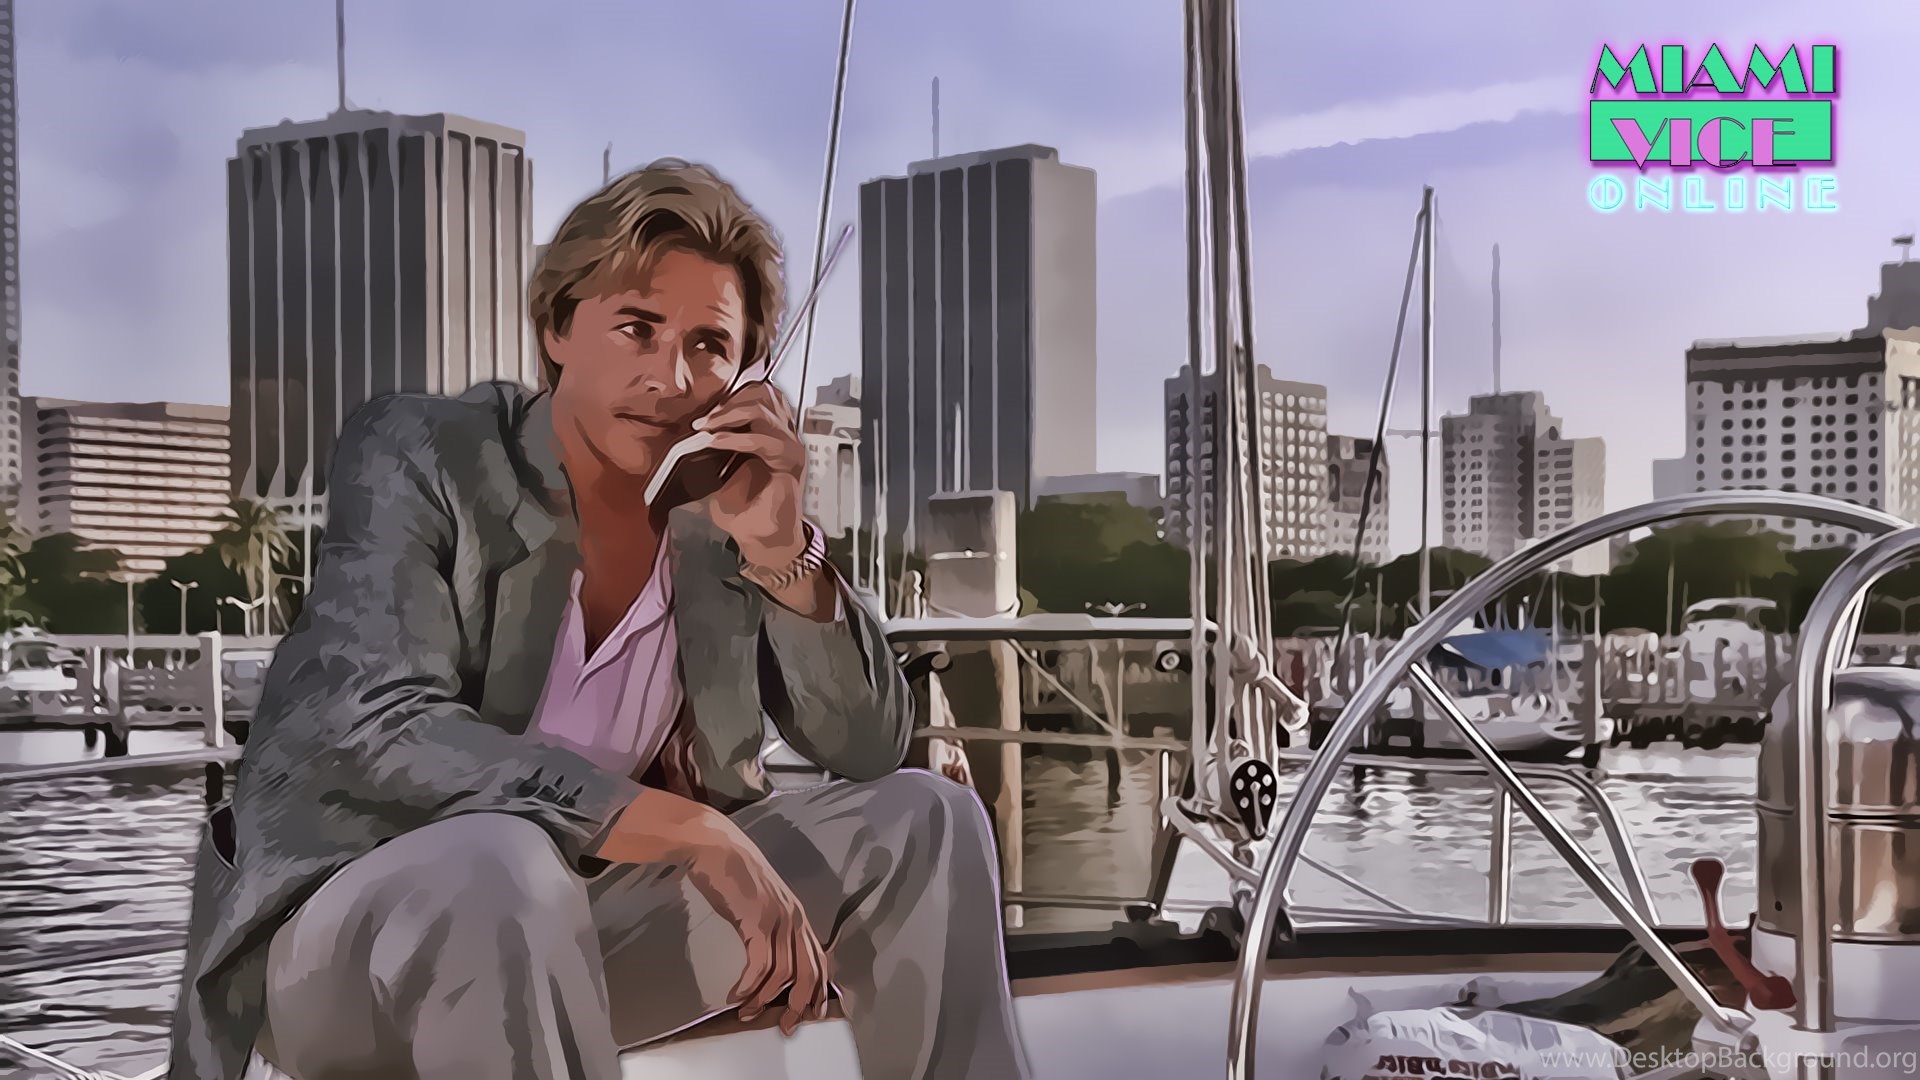 Miami Vice Online Official Wallpaper In Any